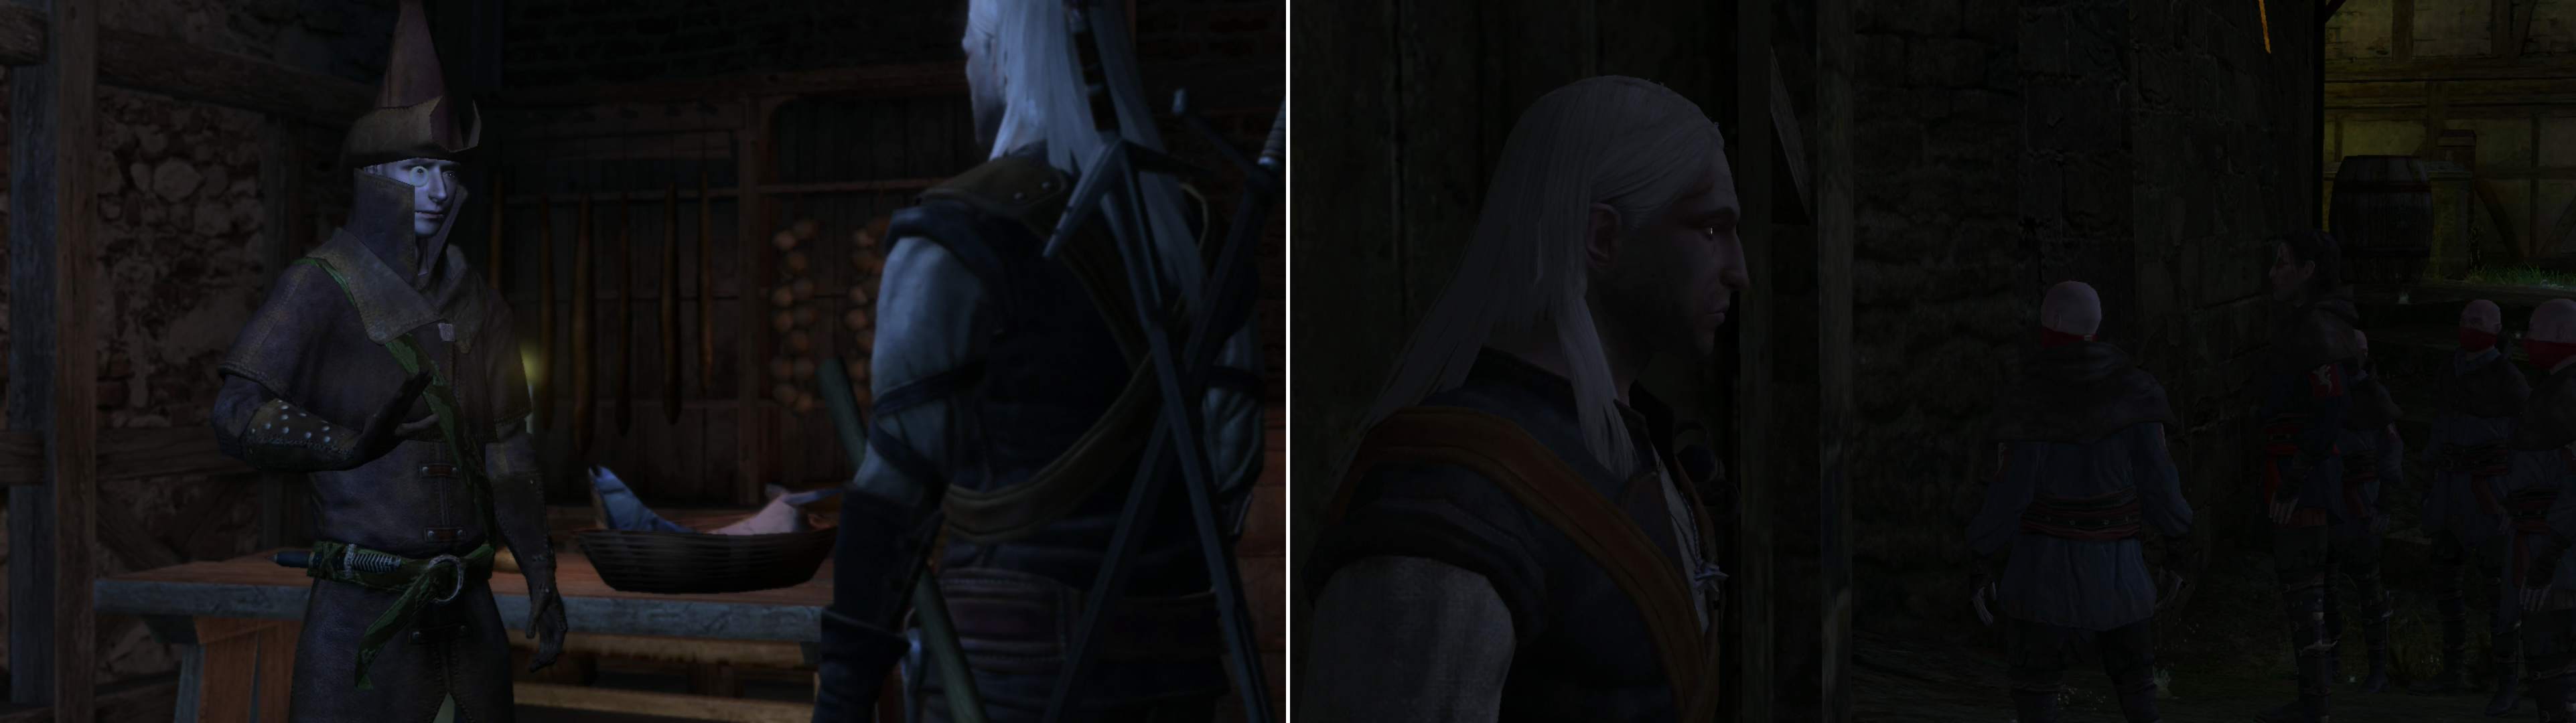 Custom Steel Sword image - The Witcher: Black Edition mod for The Witcher -  Mod DB